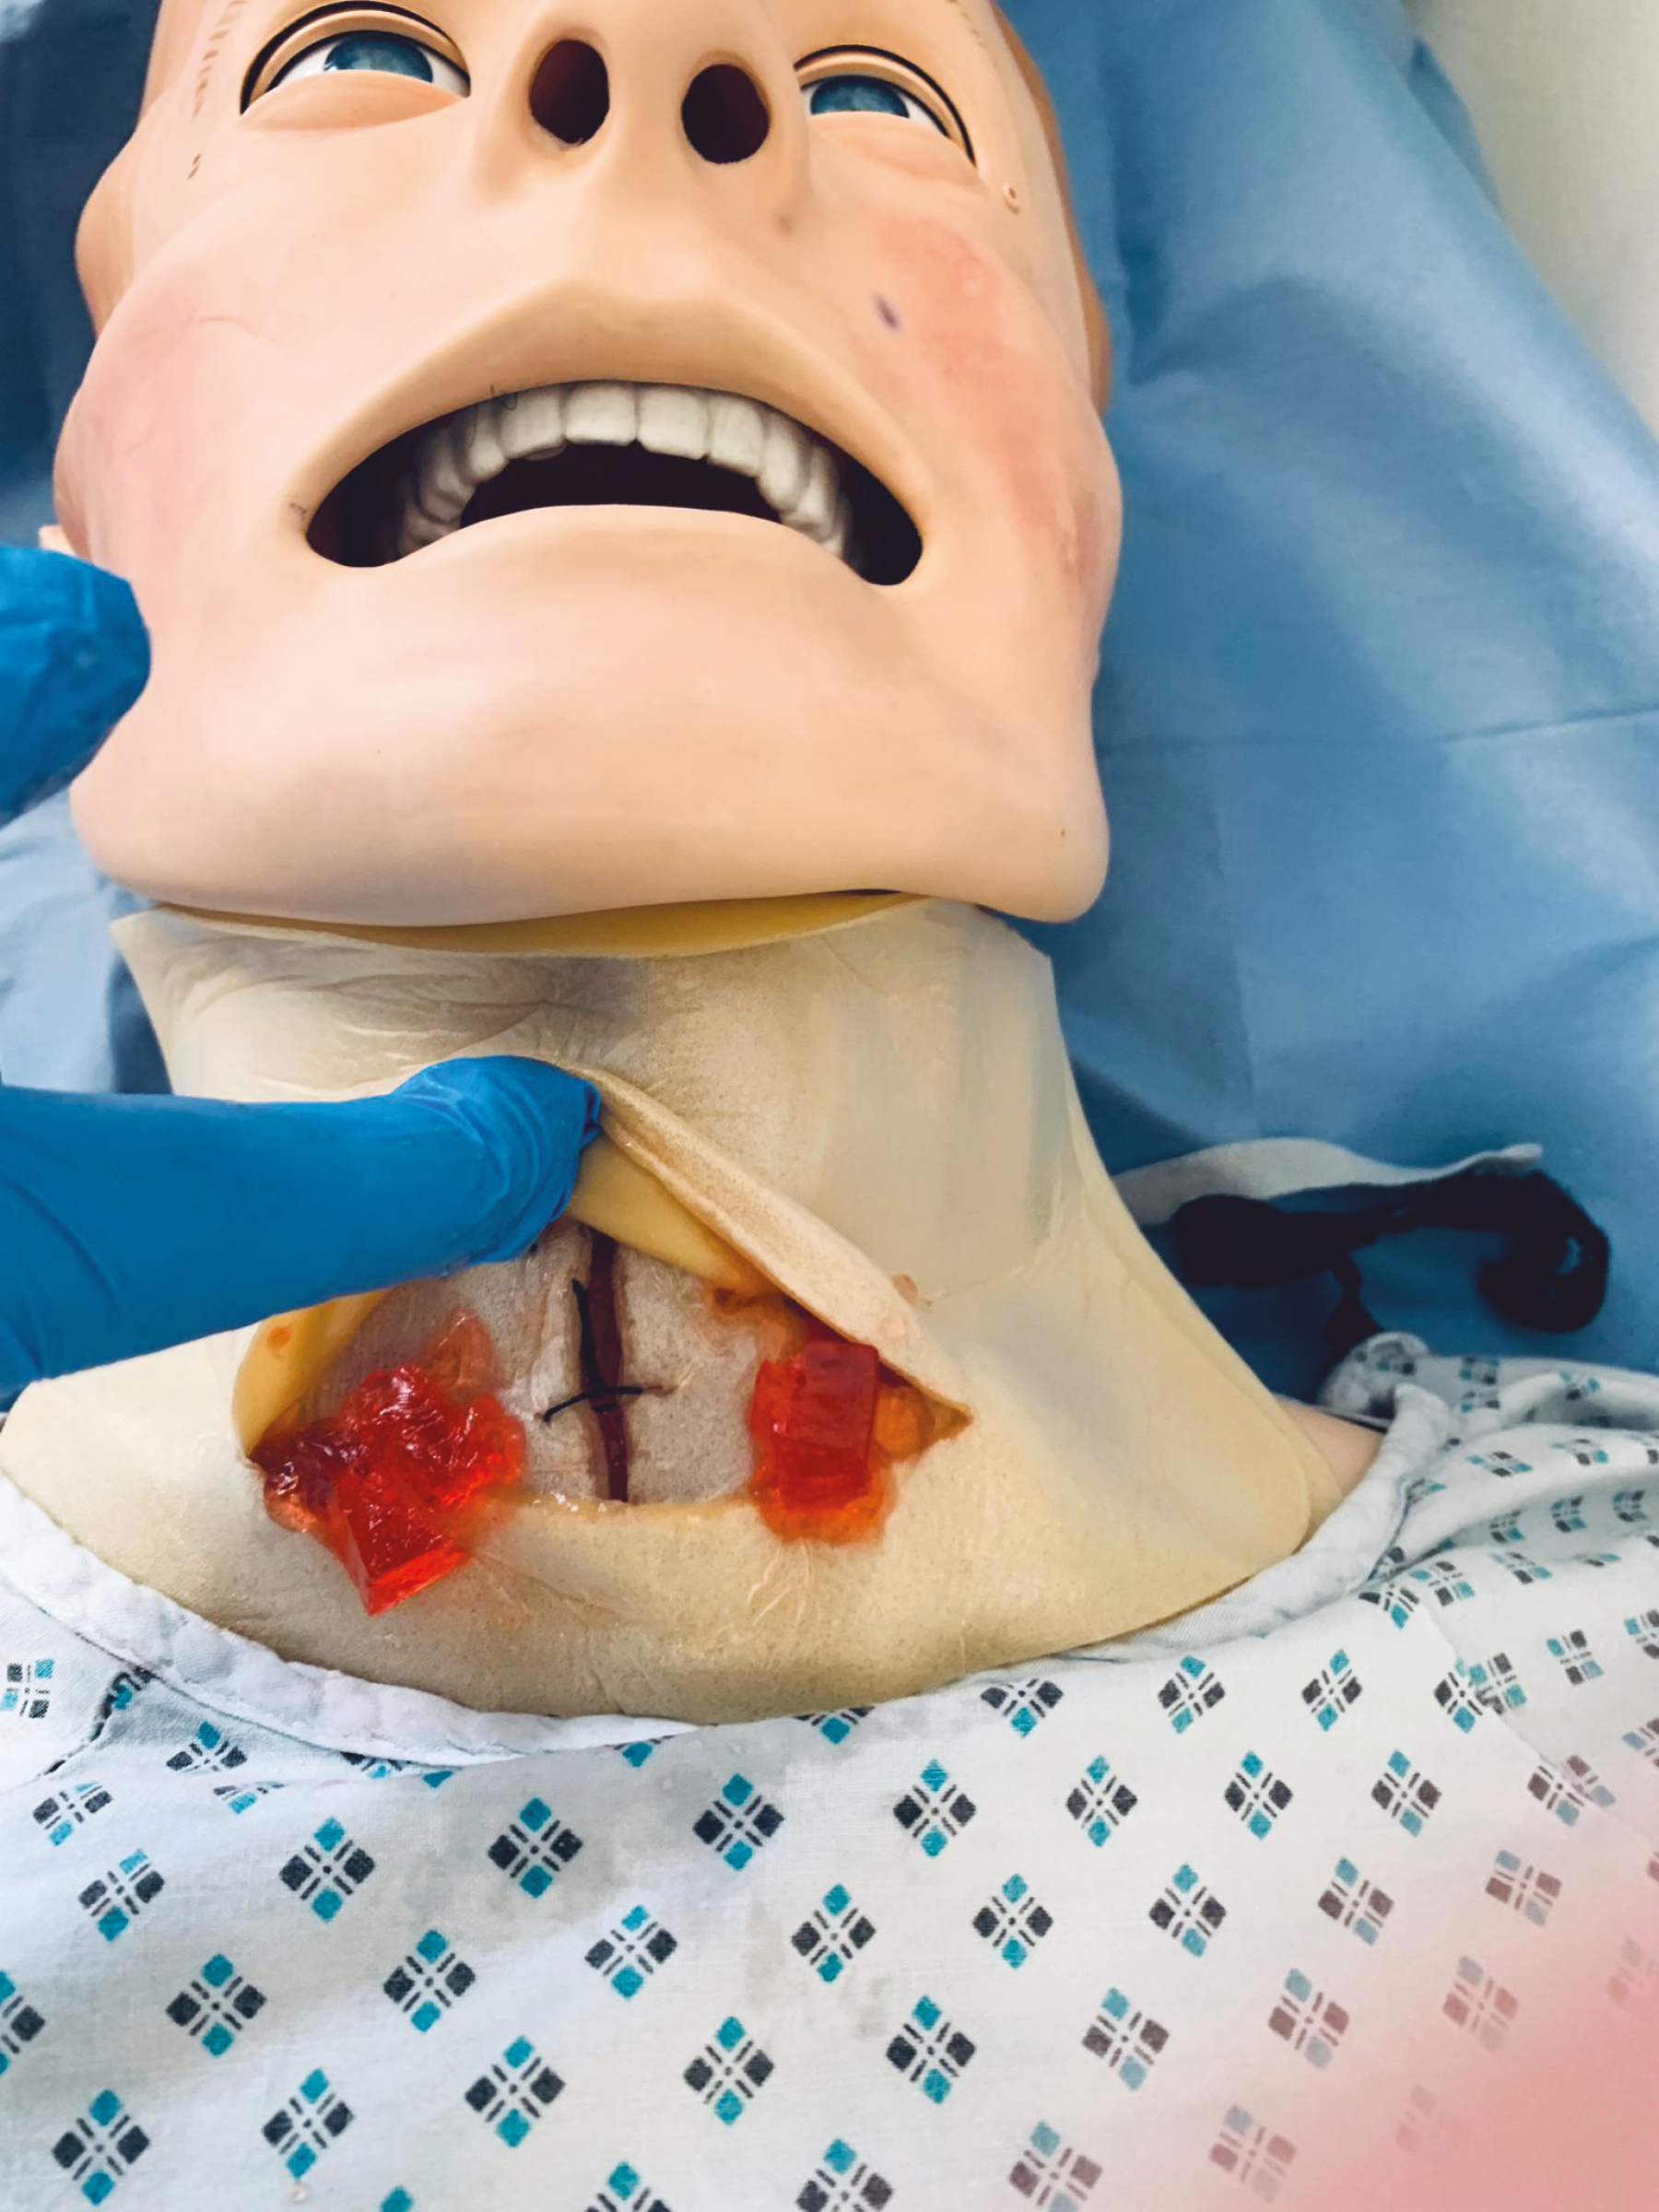 Manikin demonstrating haematoma between superficial and deep layers of sutures.